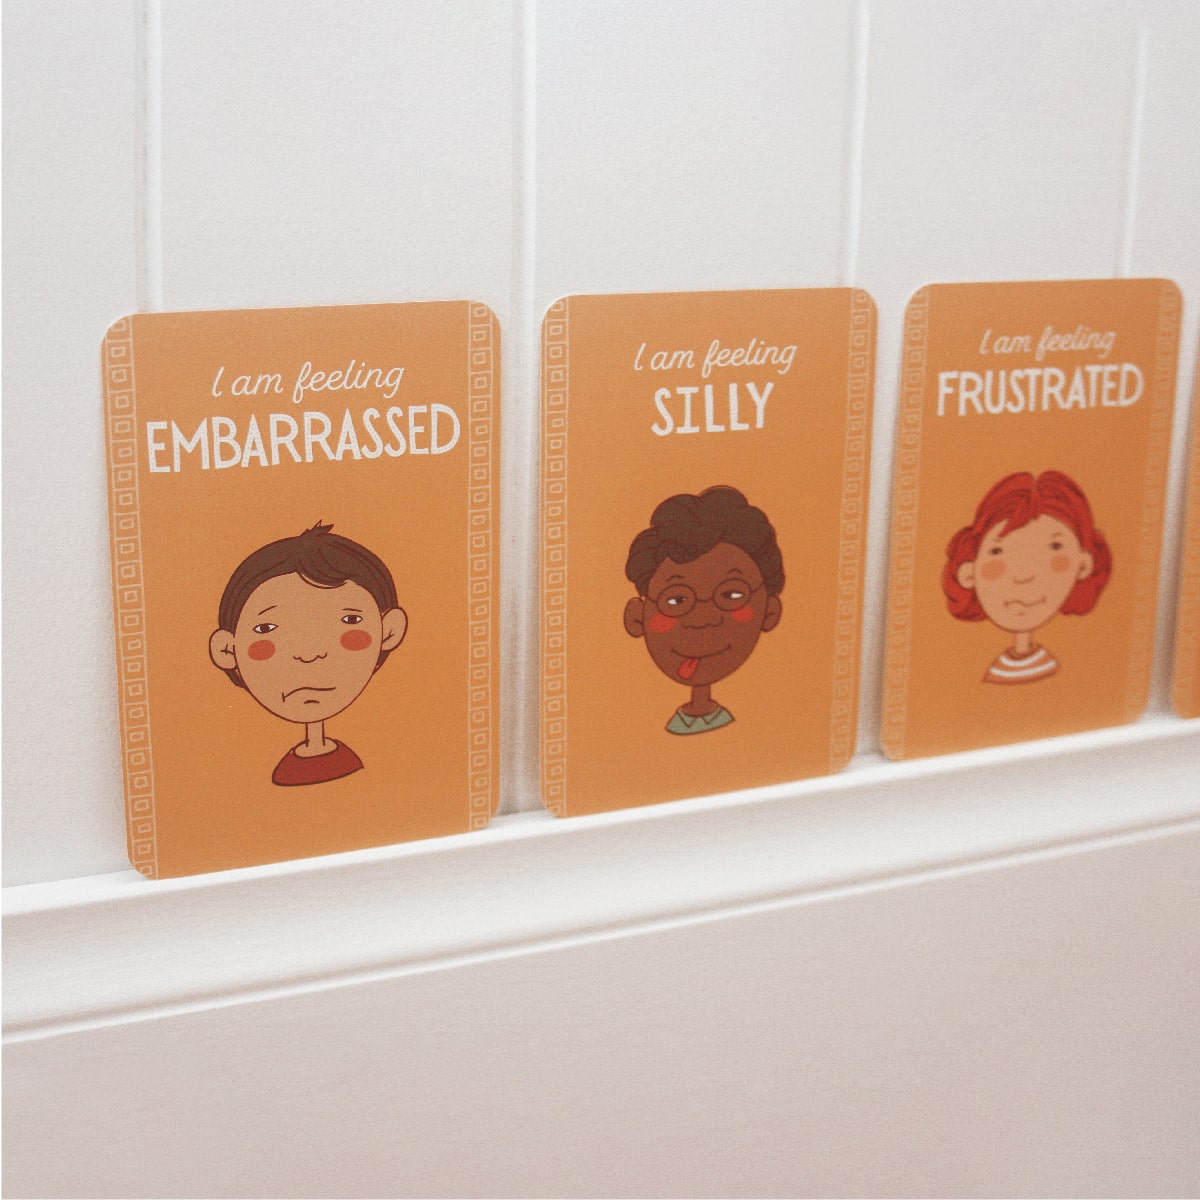 emotions activities for toddlers - set of cards hung on wall